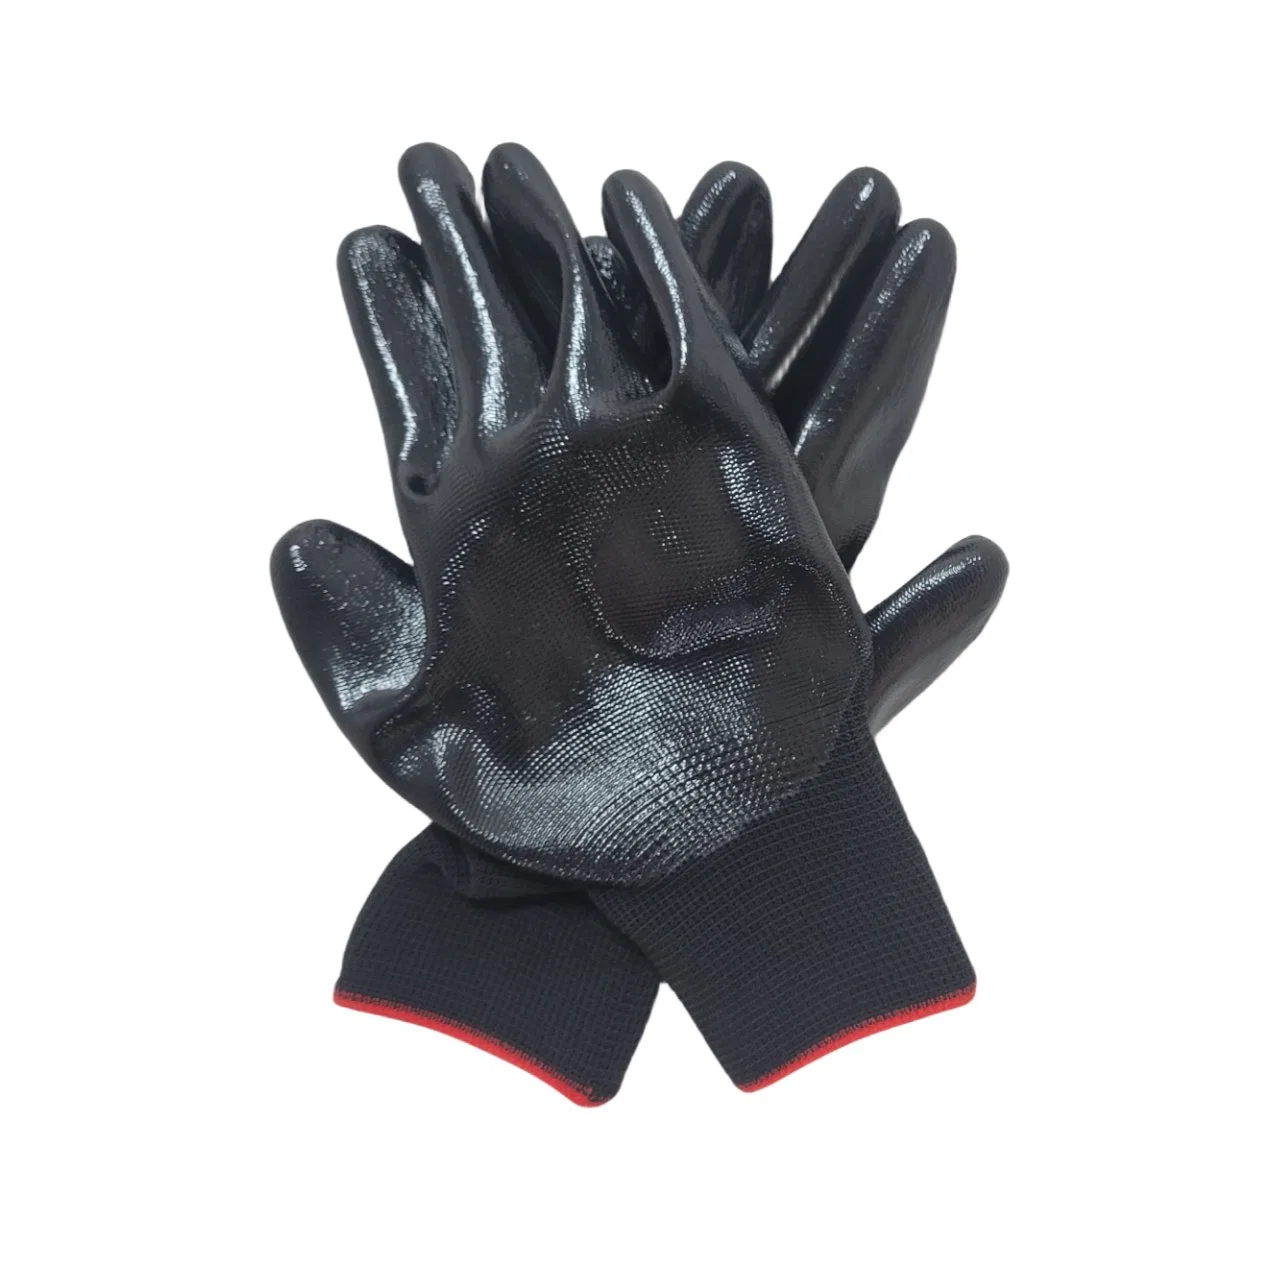 Nitrile Coated Safety Protective Industrial Work Rubber Garden Gloves